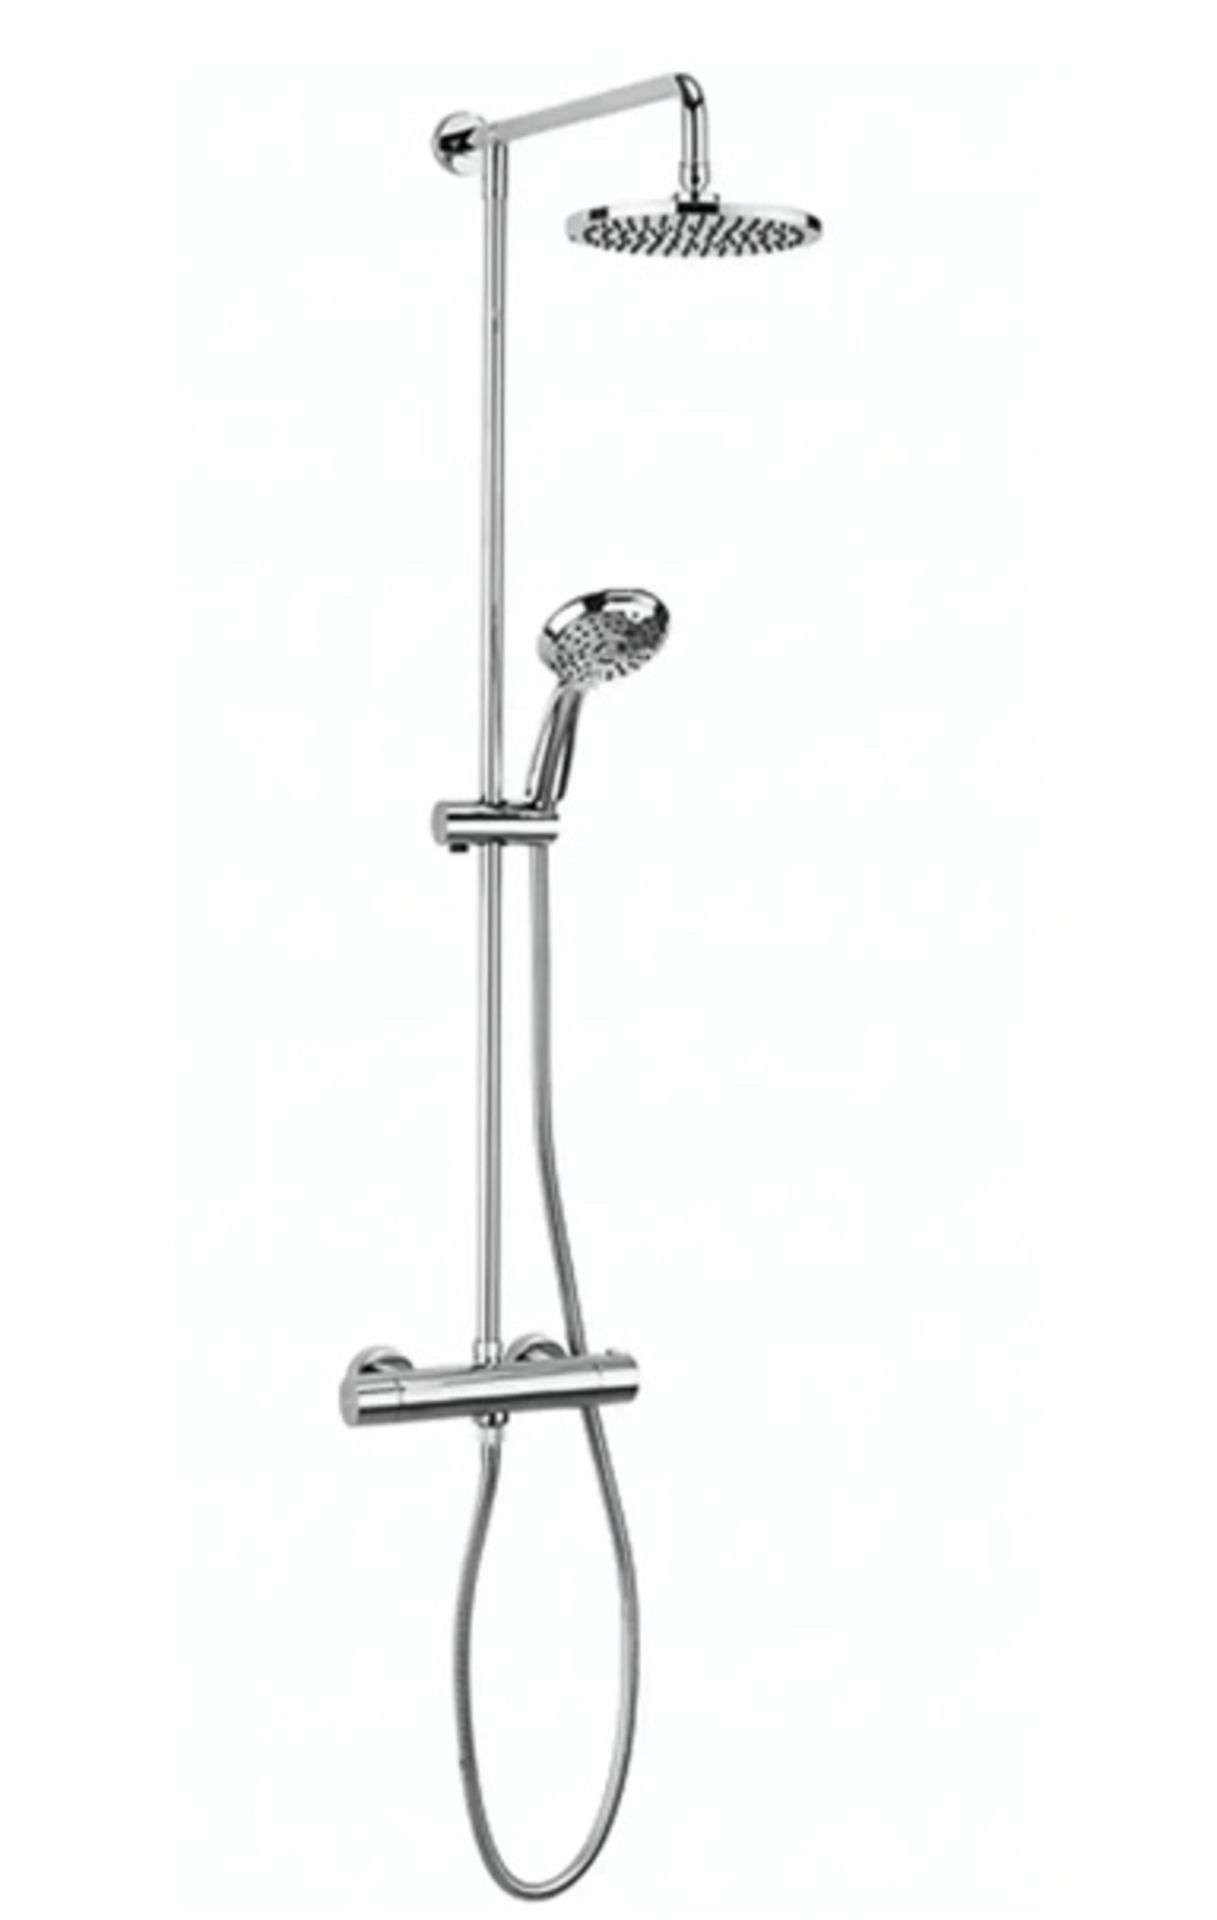 Brand New Boxed Metro Mixer Shower System Thermostatic - Chrome RRP £190 **No Vat**